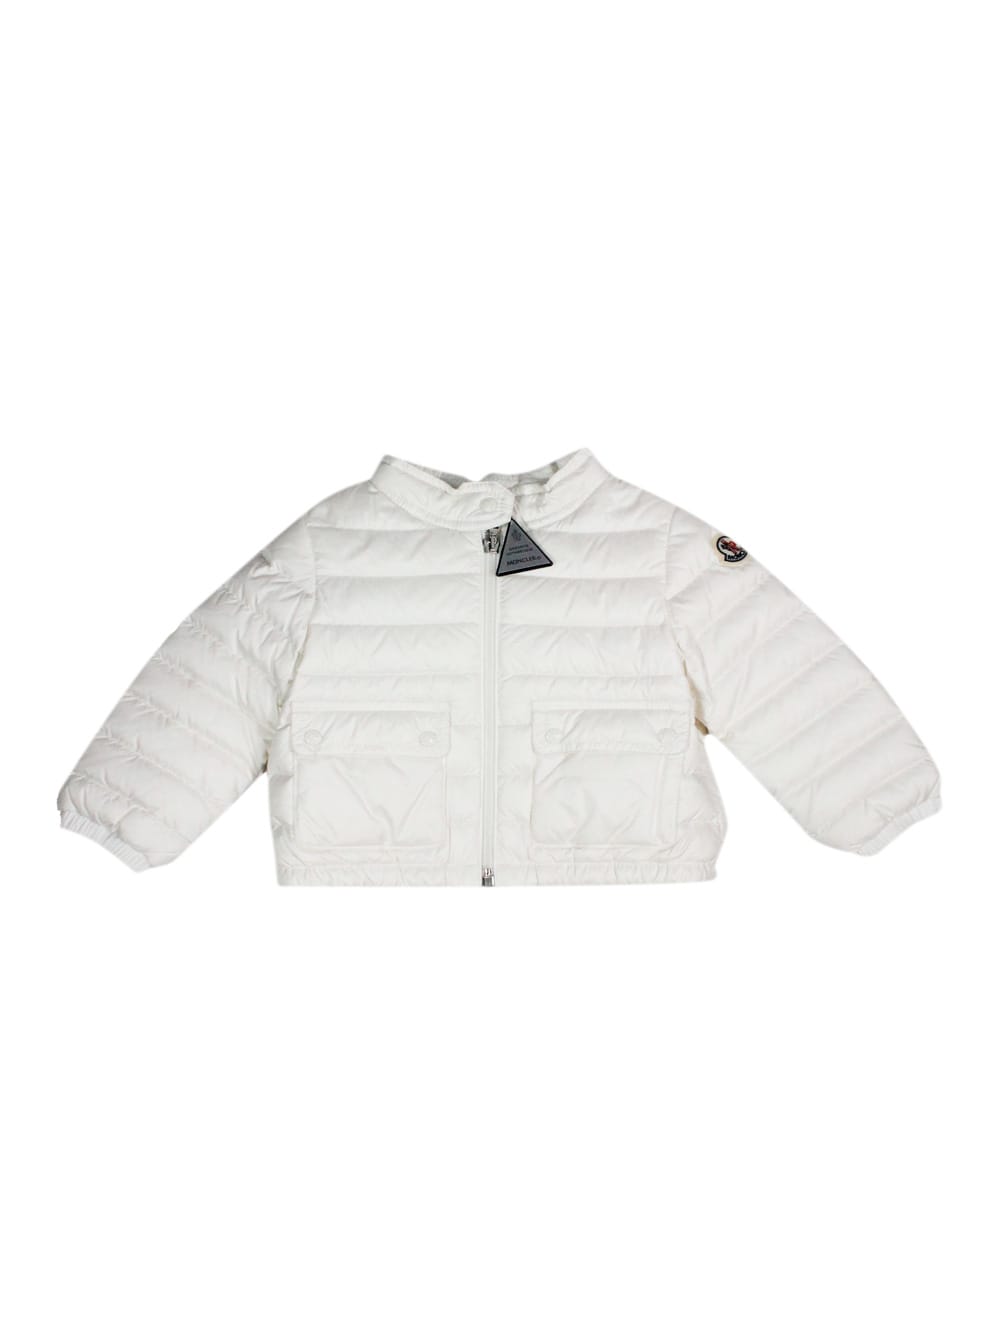 Moncler Lightweight 100 Gram Lans Long-sleeved Down Jacket With Front Zip Closure And Front Pockets. Logo On The Sleeve